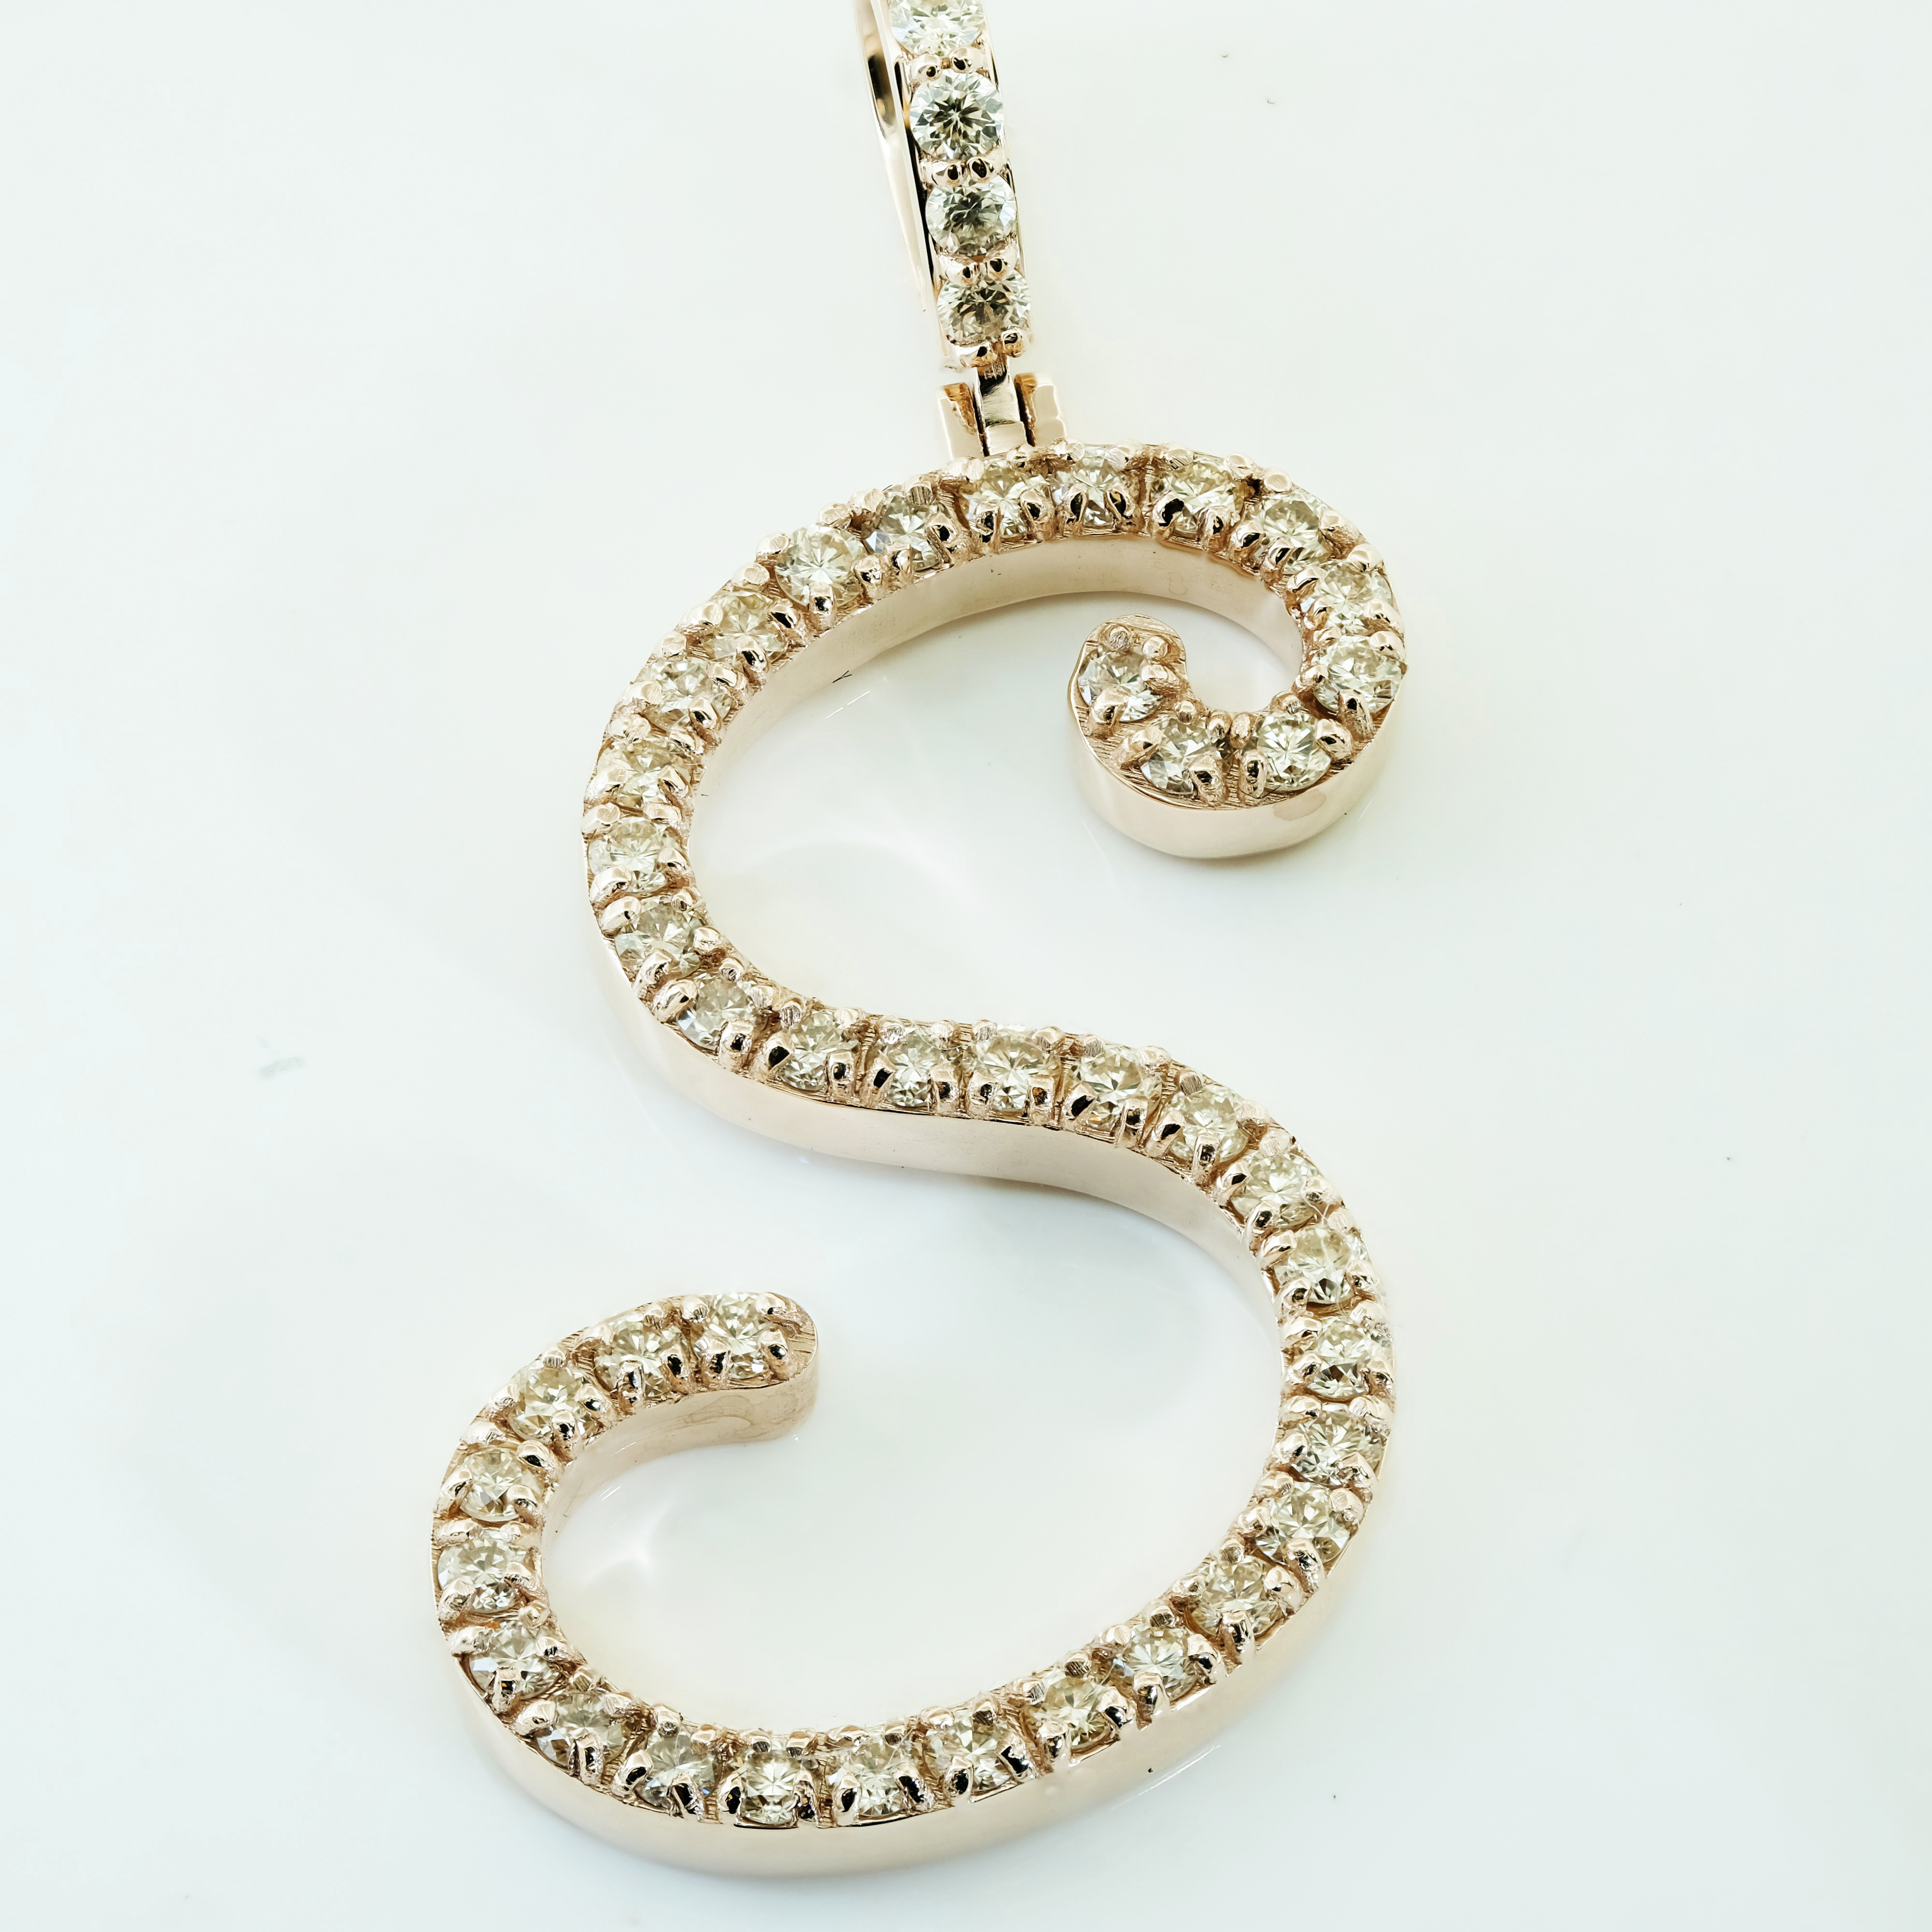 Yellow Gold S Initial Pendant Necklace